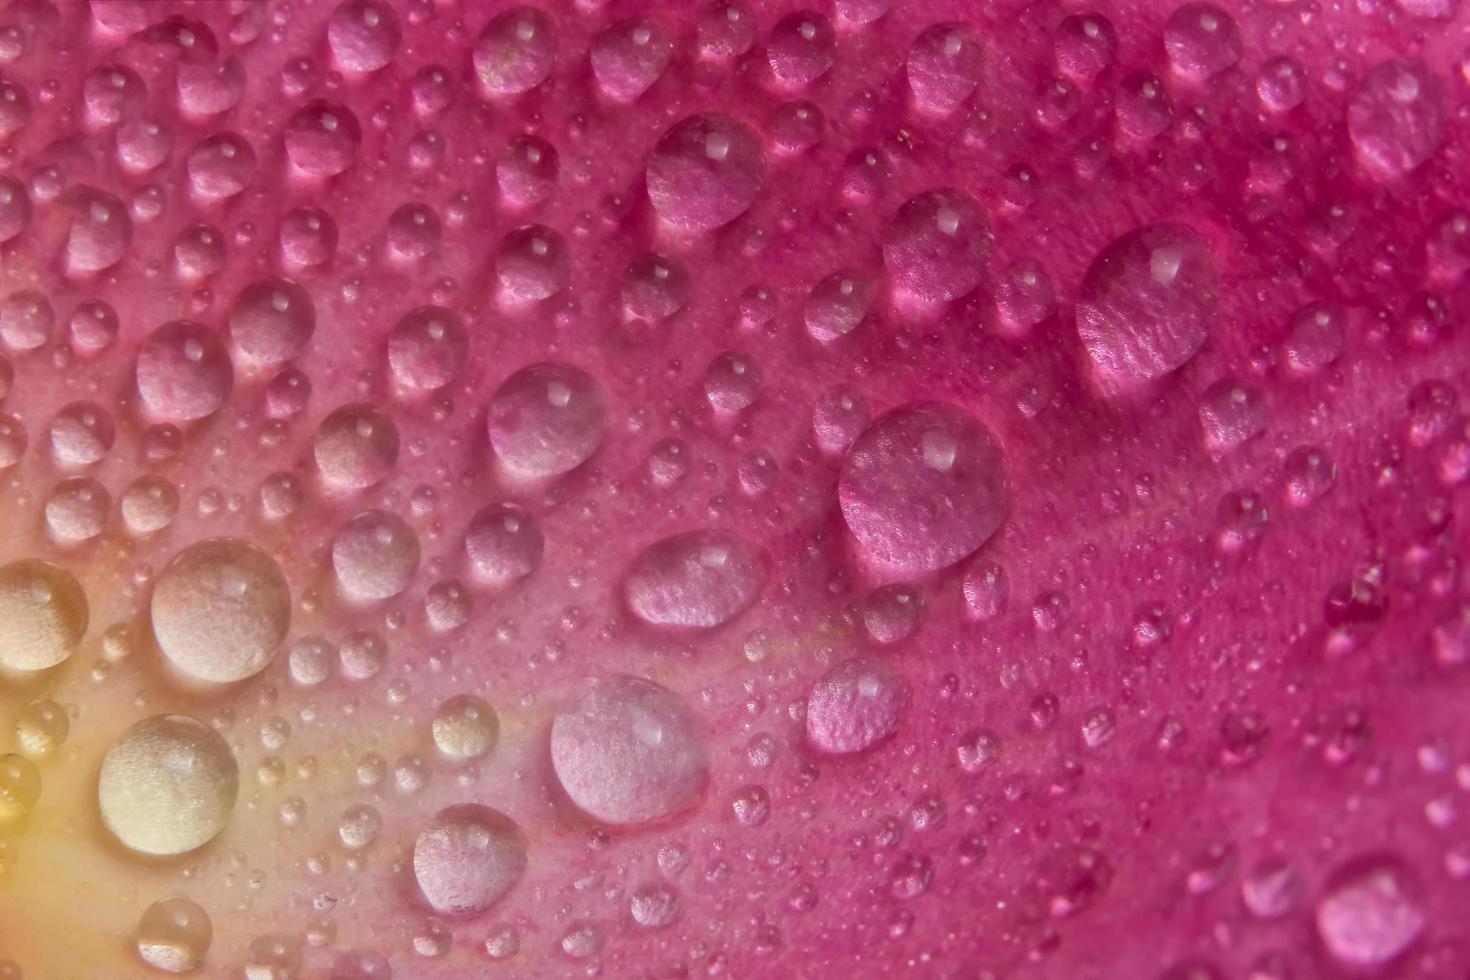 Water droplets on the petals of a pink rose photo